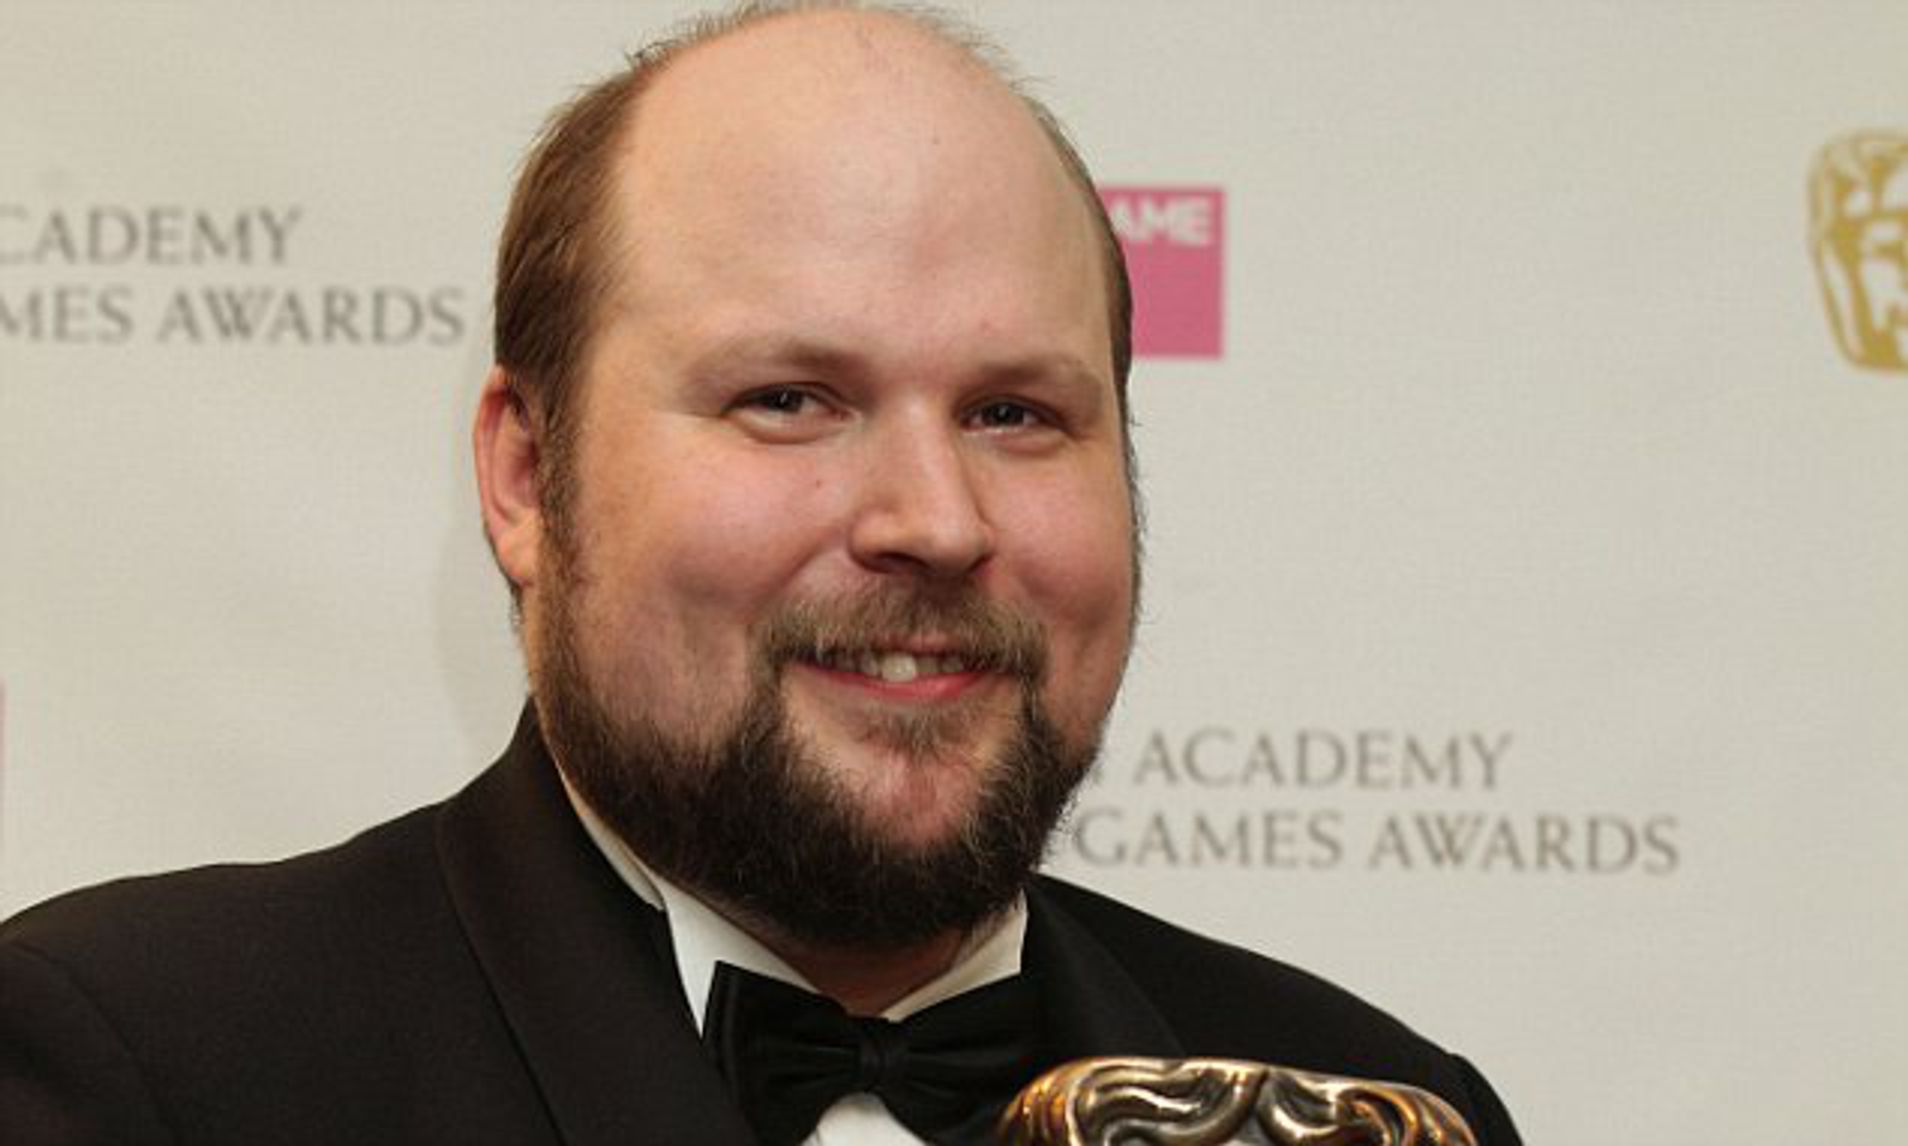 Elin Zetterstrand: 8 Lesser Known Facts About Markus Persson’s Ex-wife That Will Shock You